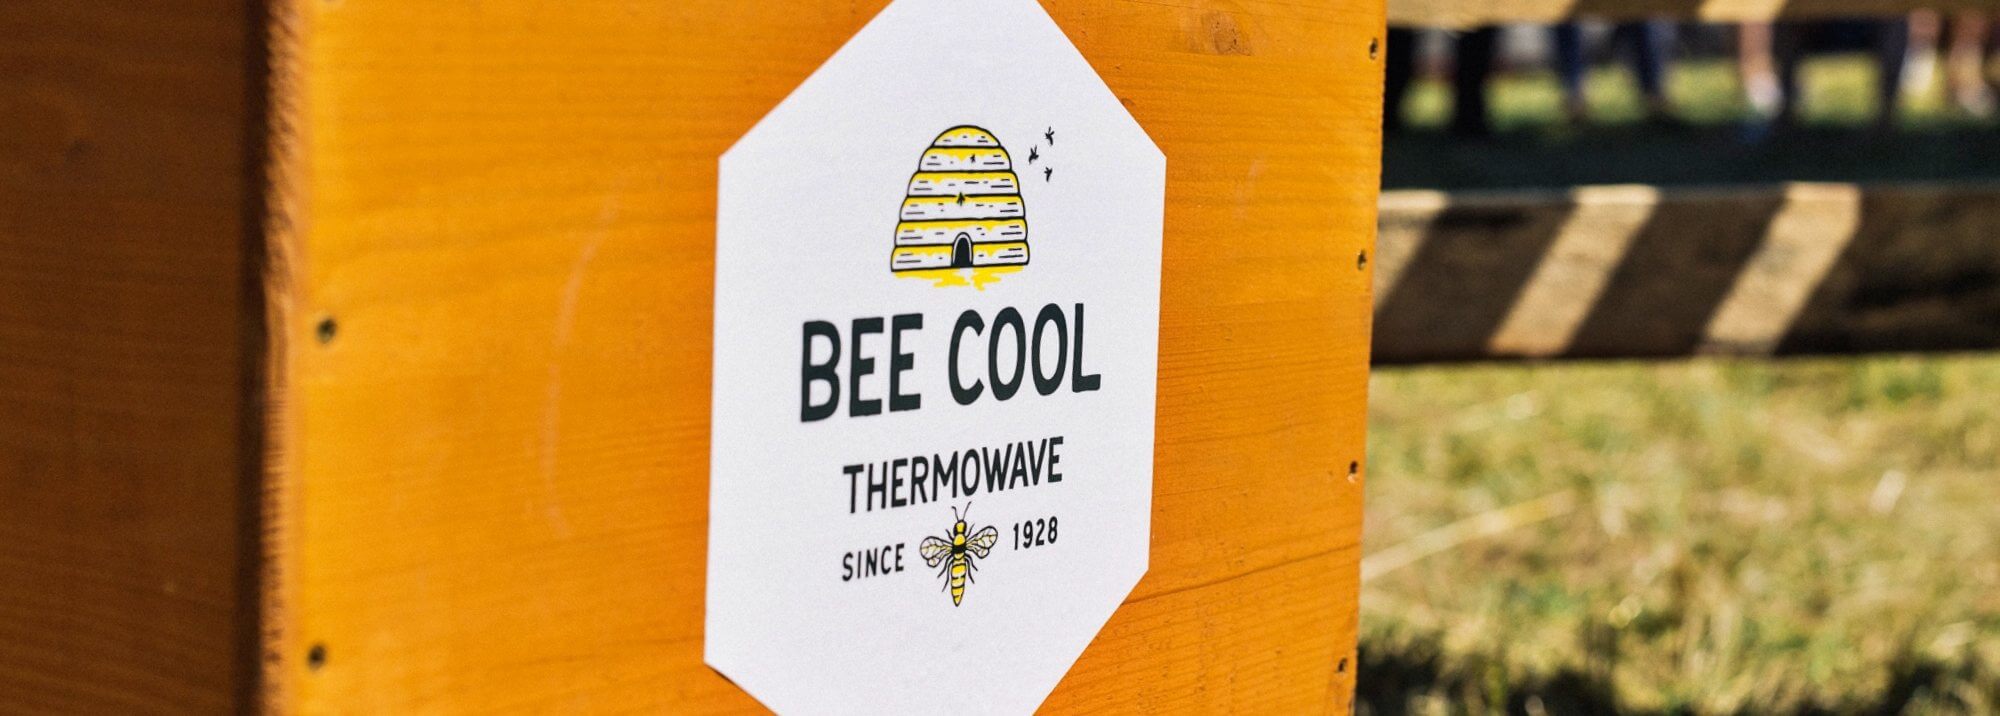 The bee hive with the Thermowave logo